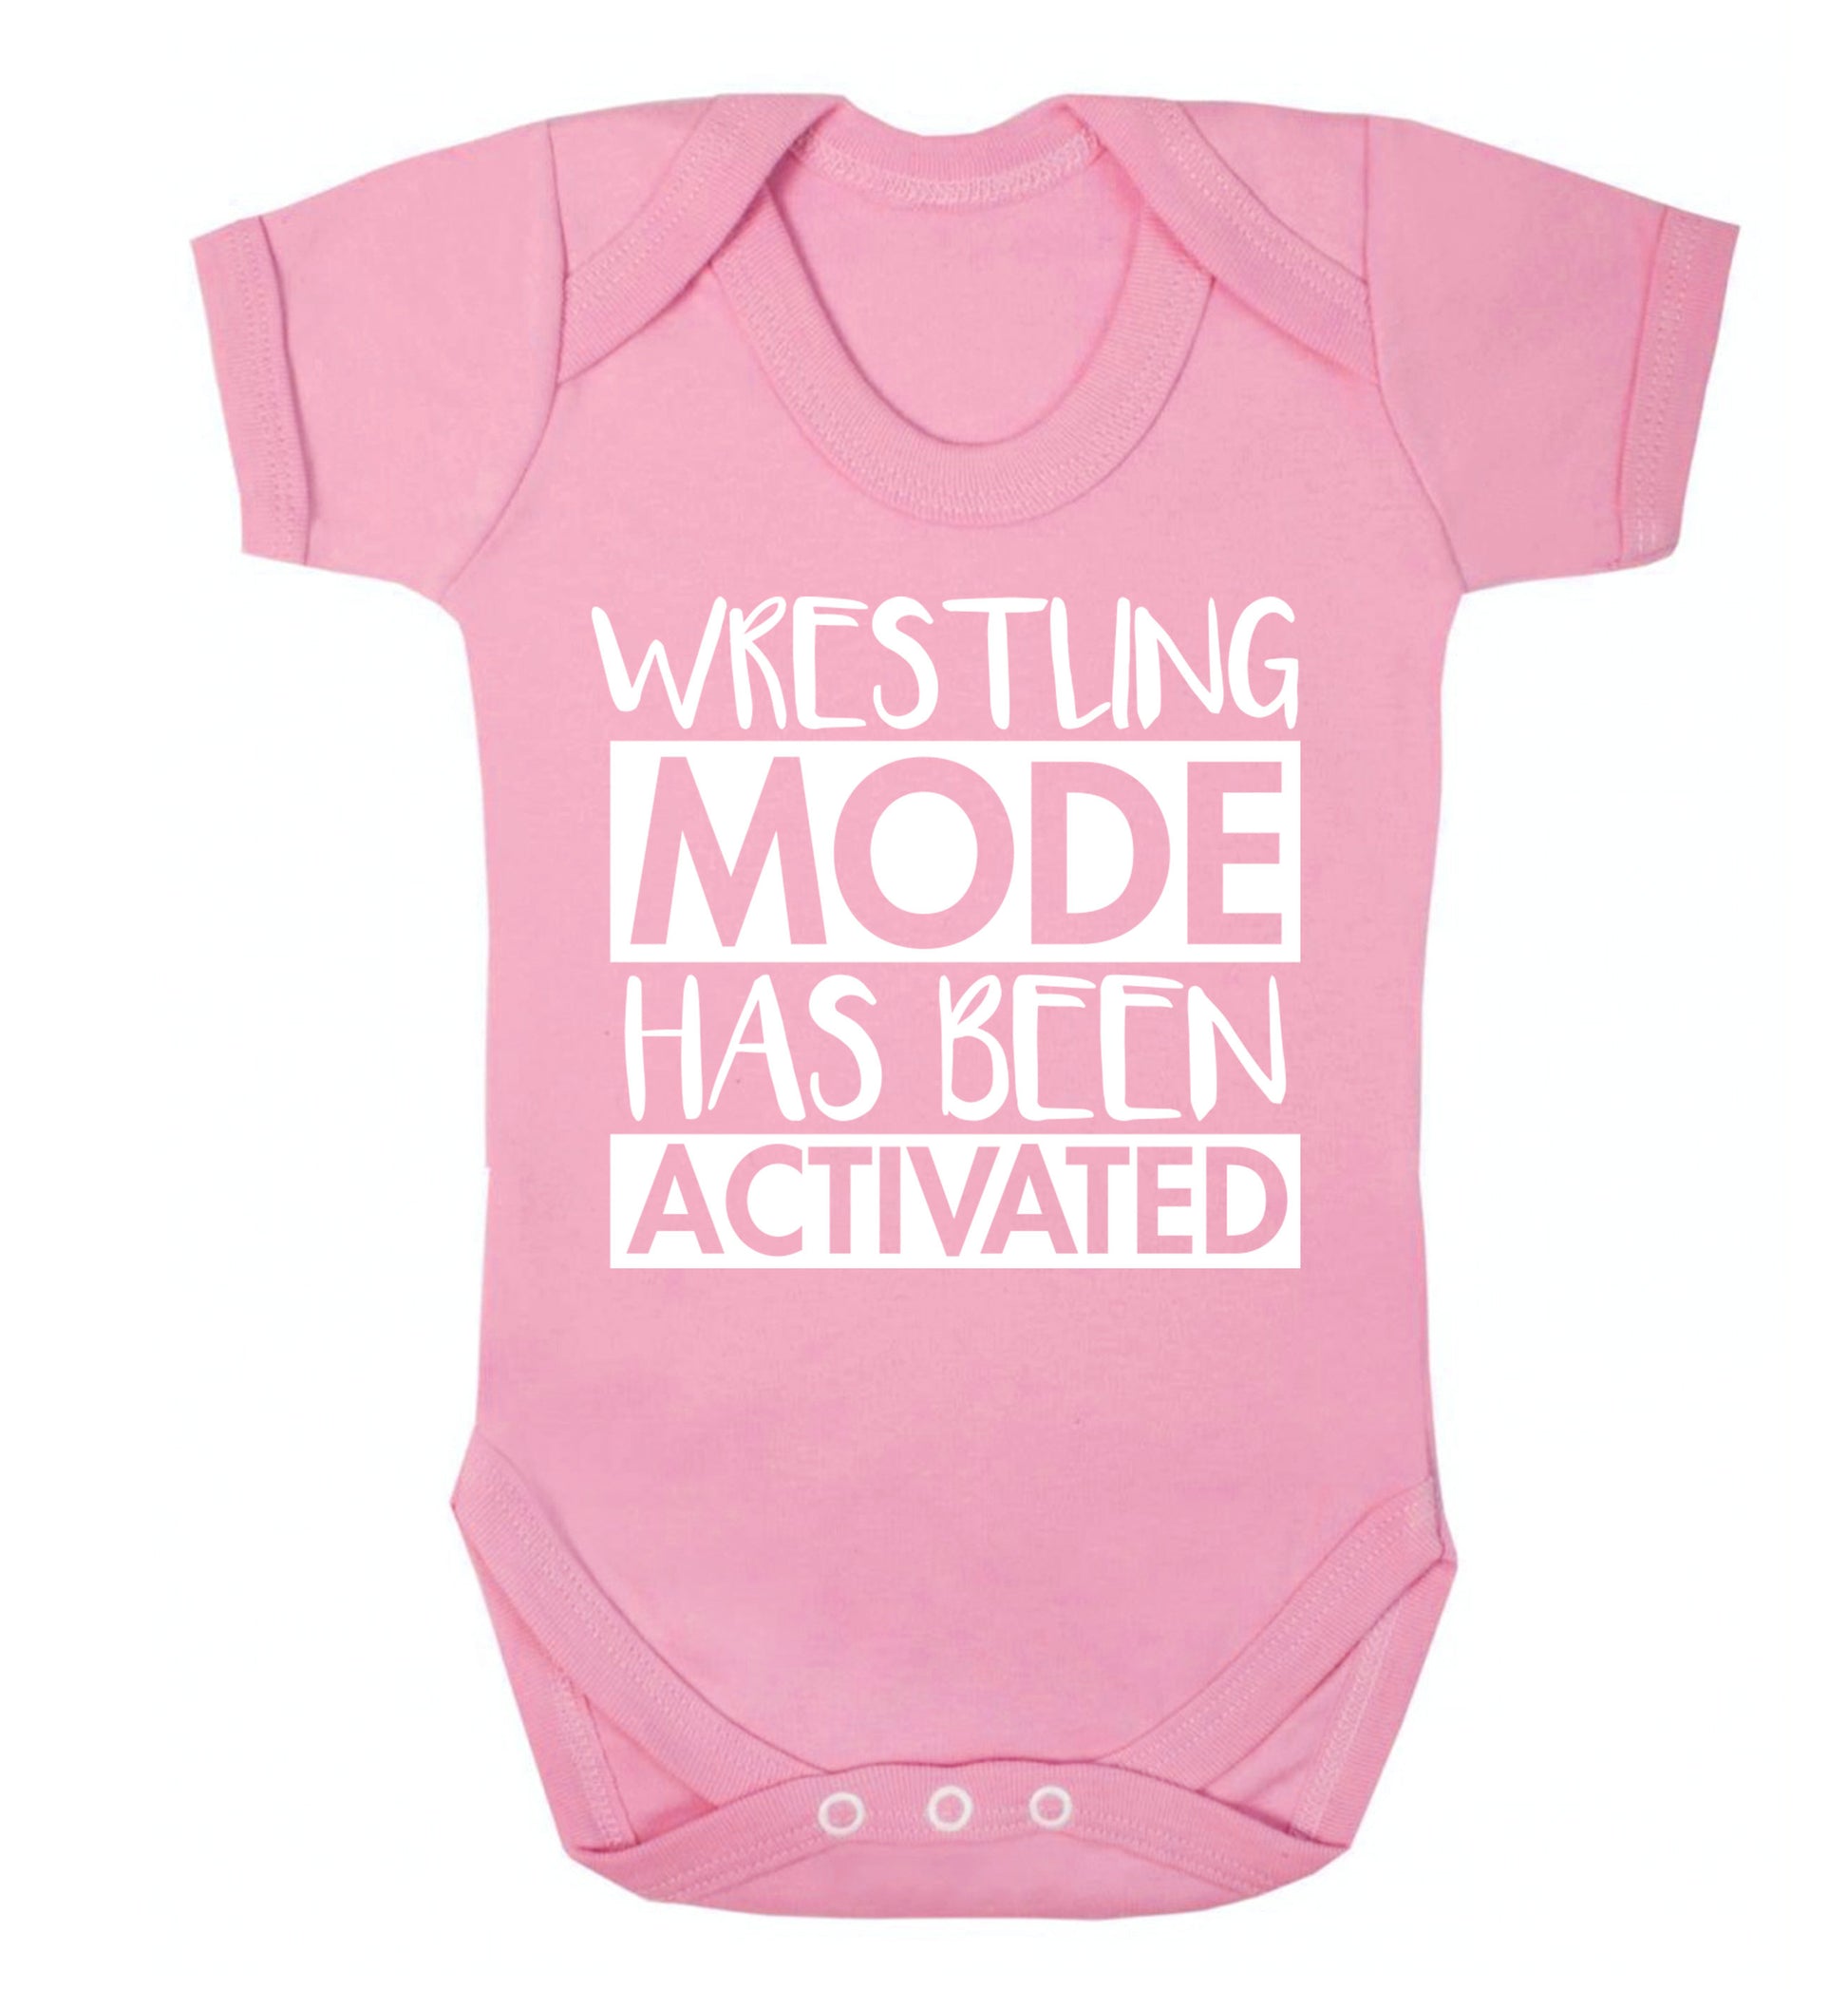 Wresting mode activated Baby Vest pale pink 18-24 months